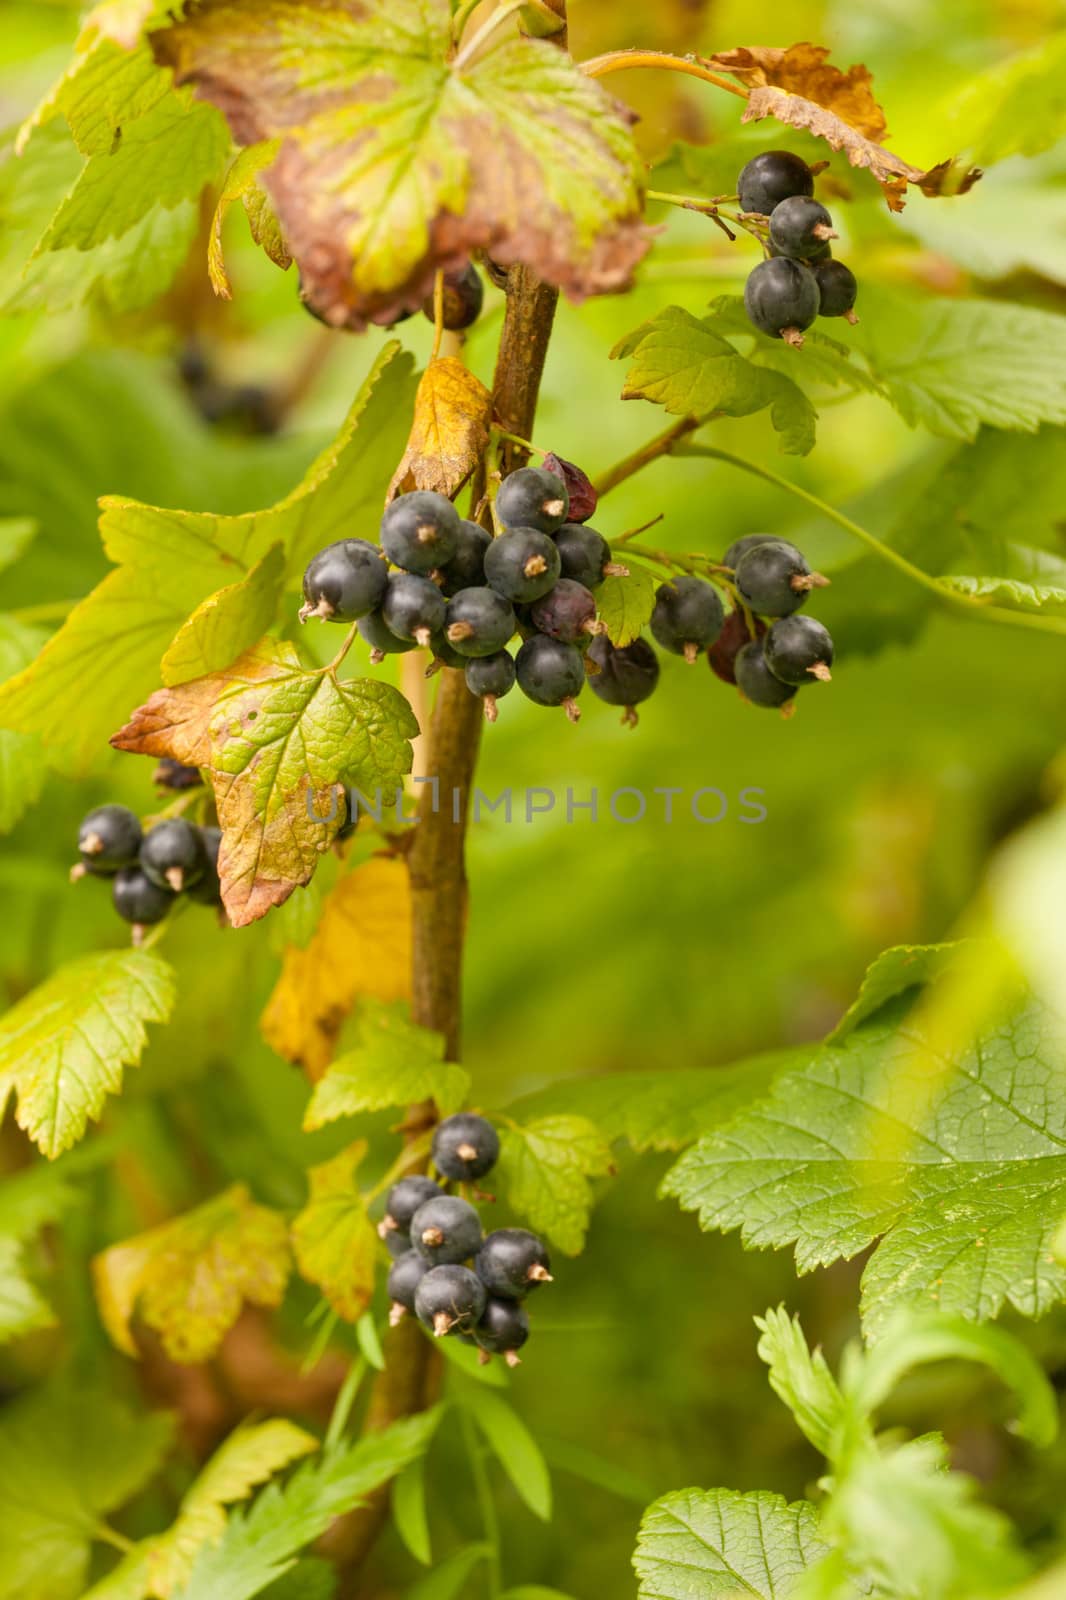 Ripe Northern Black Currant berries, Rubus hudsonianum, hanging in clusters from wild bush ready for harvest